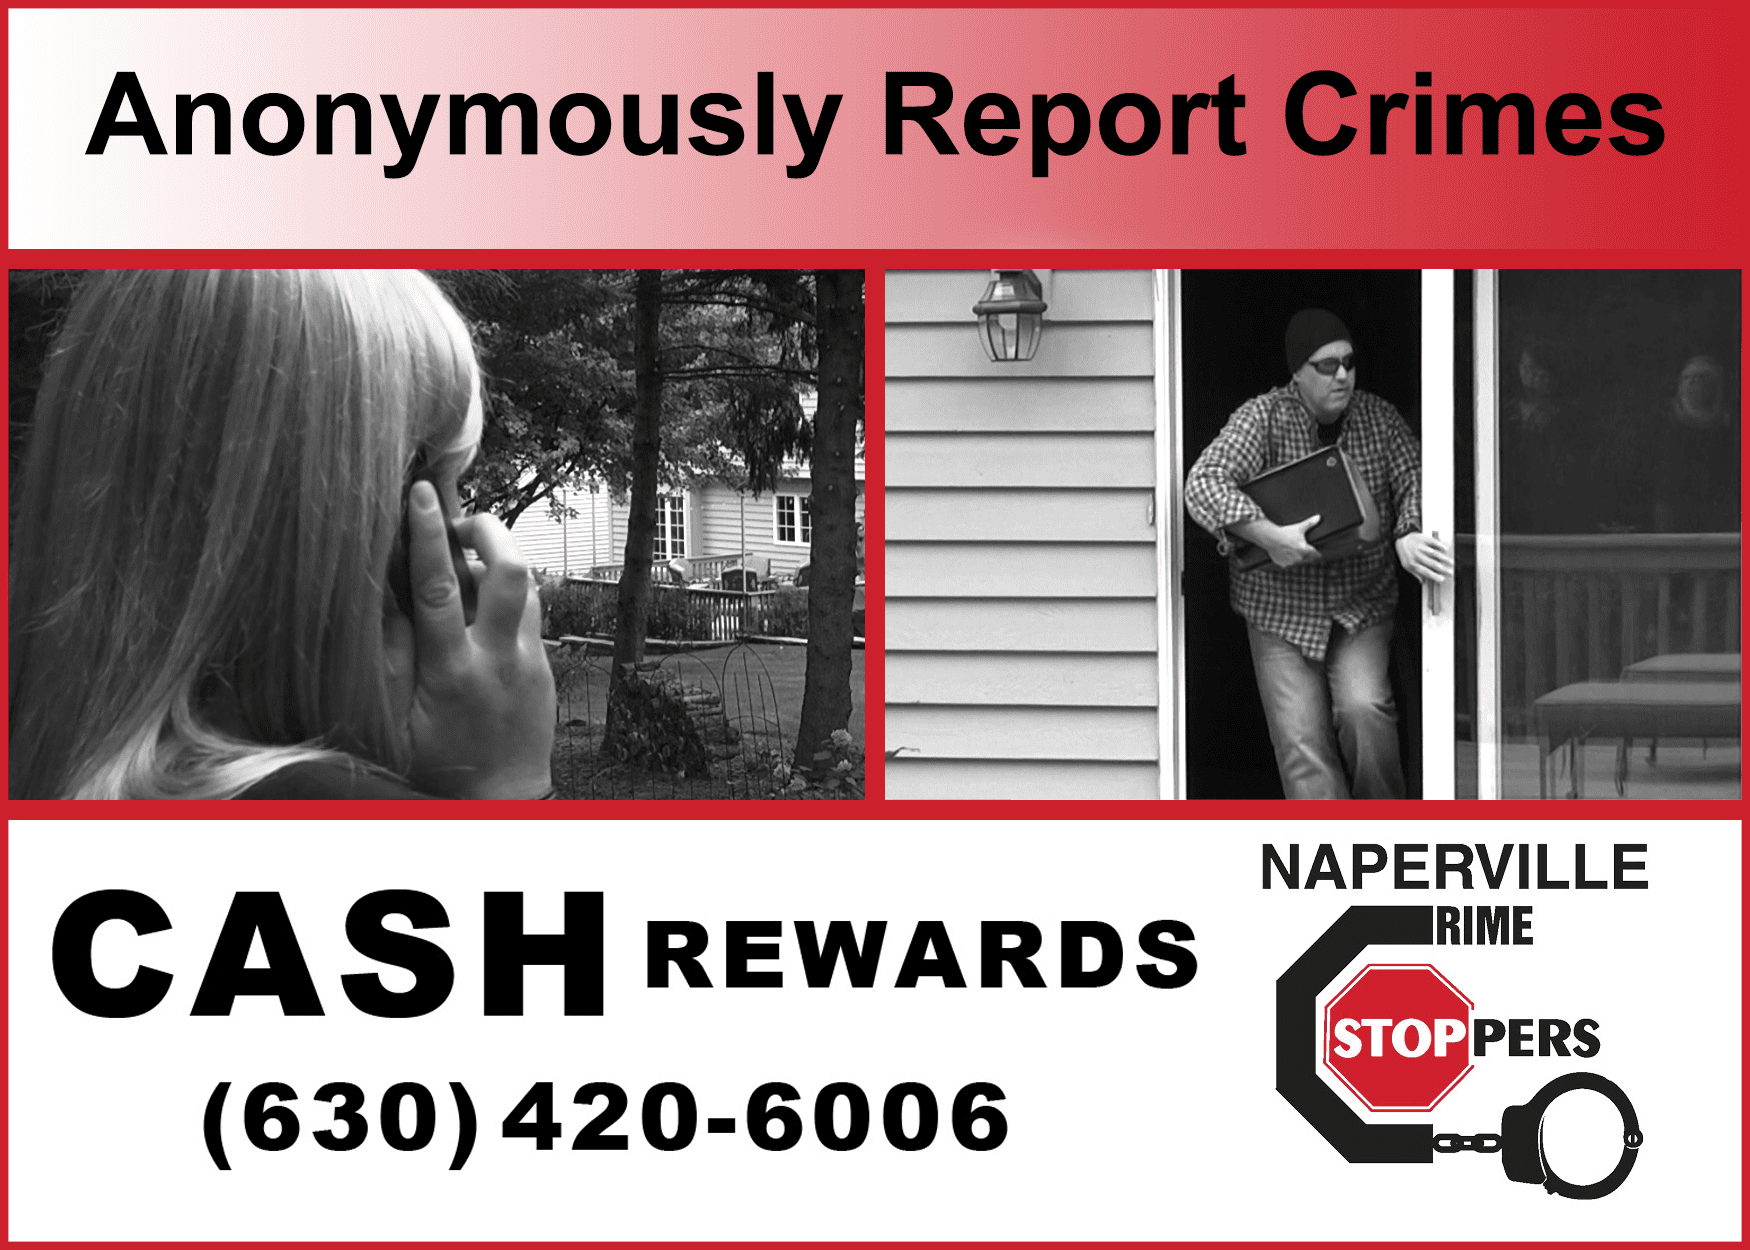 Anonymously report crimes with Naperville Crime Stoppers